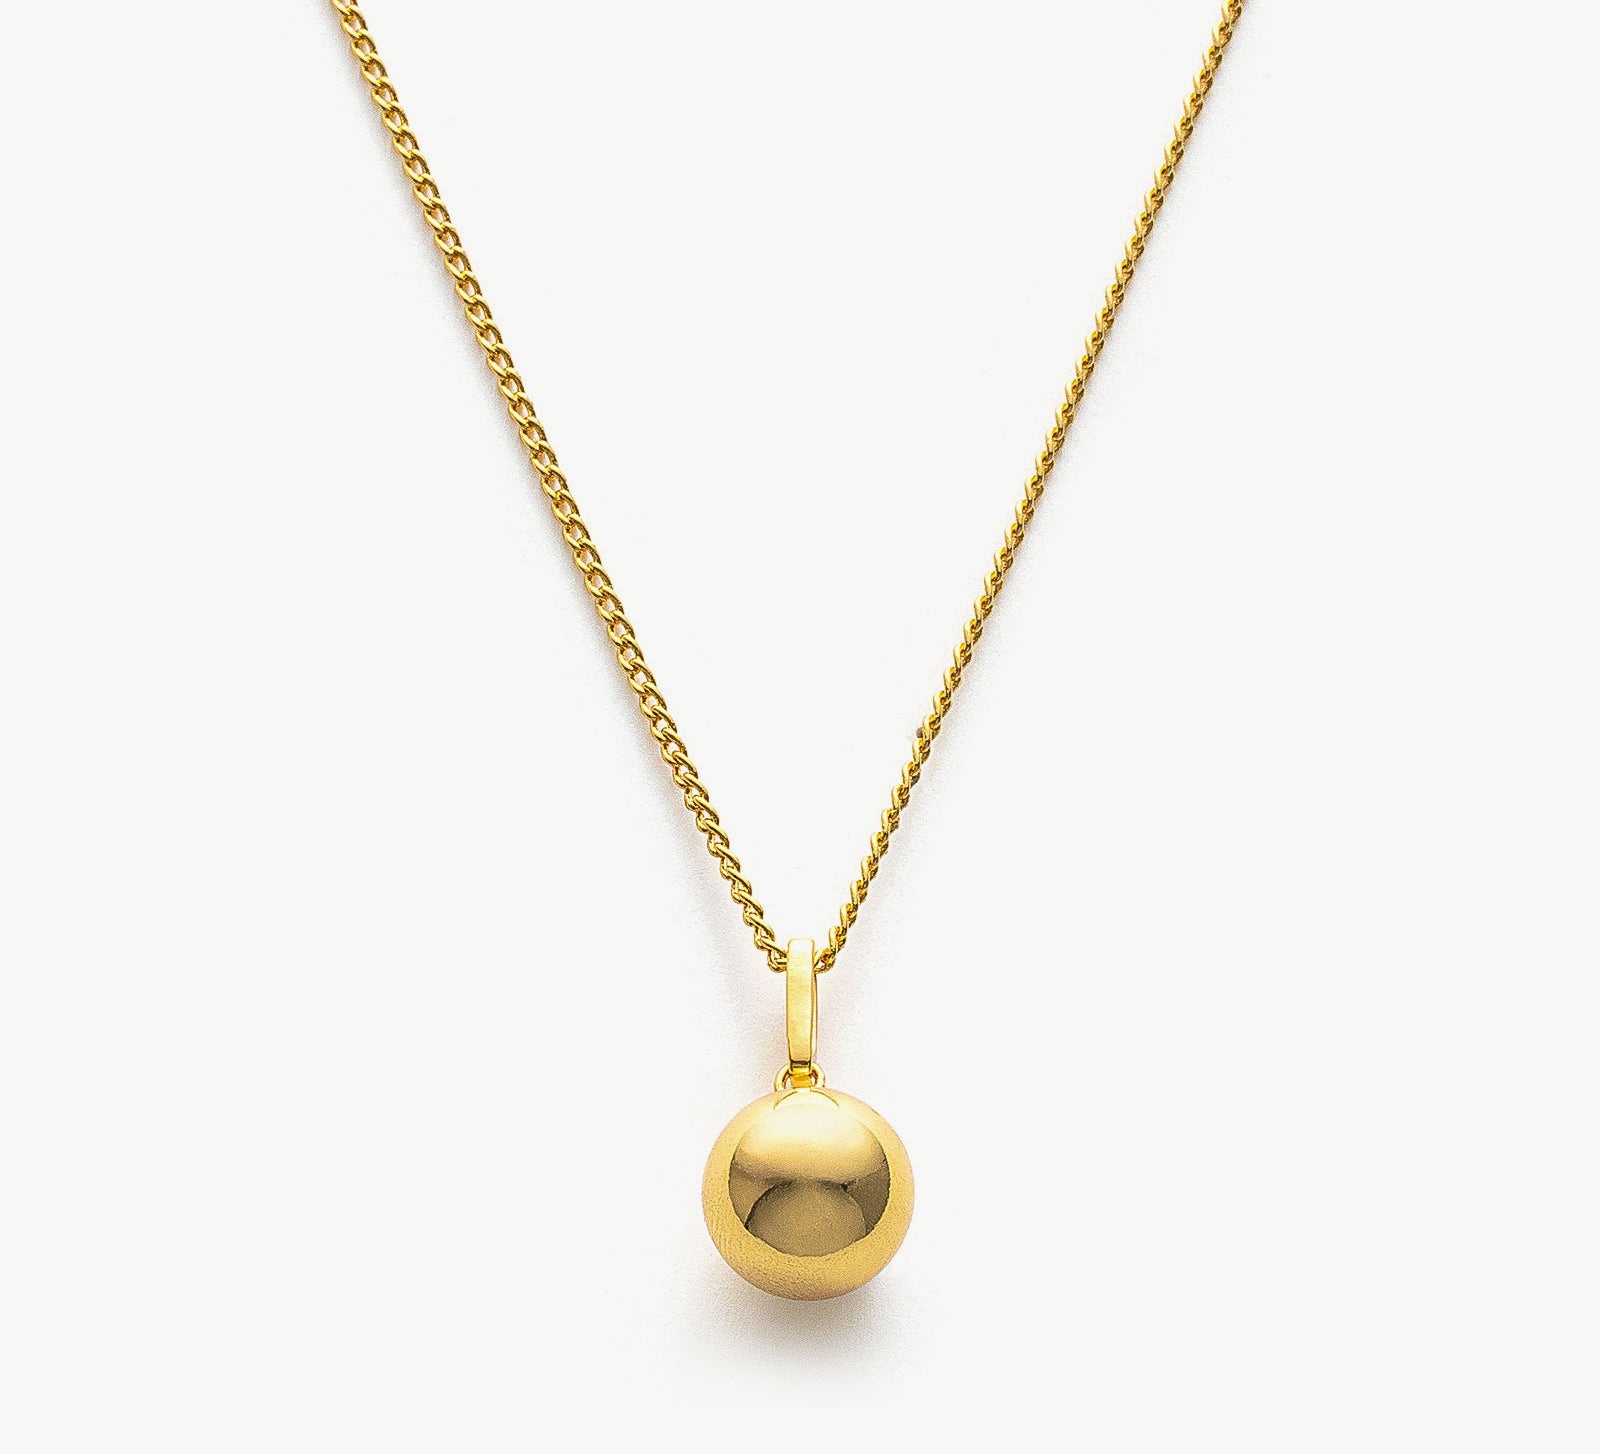 Sphere Pendant Chain Necklace, a symbol of modern minimalism, featuring a sleek and polished sphere pendant suspended from a delicate chain, adding a touch of contemporary elegance to your neckline